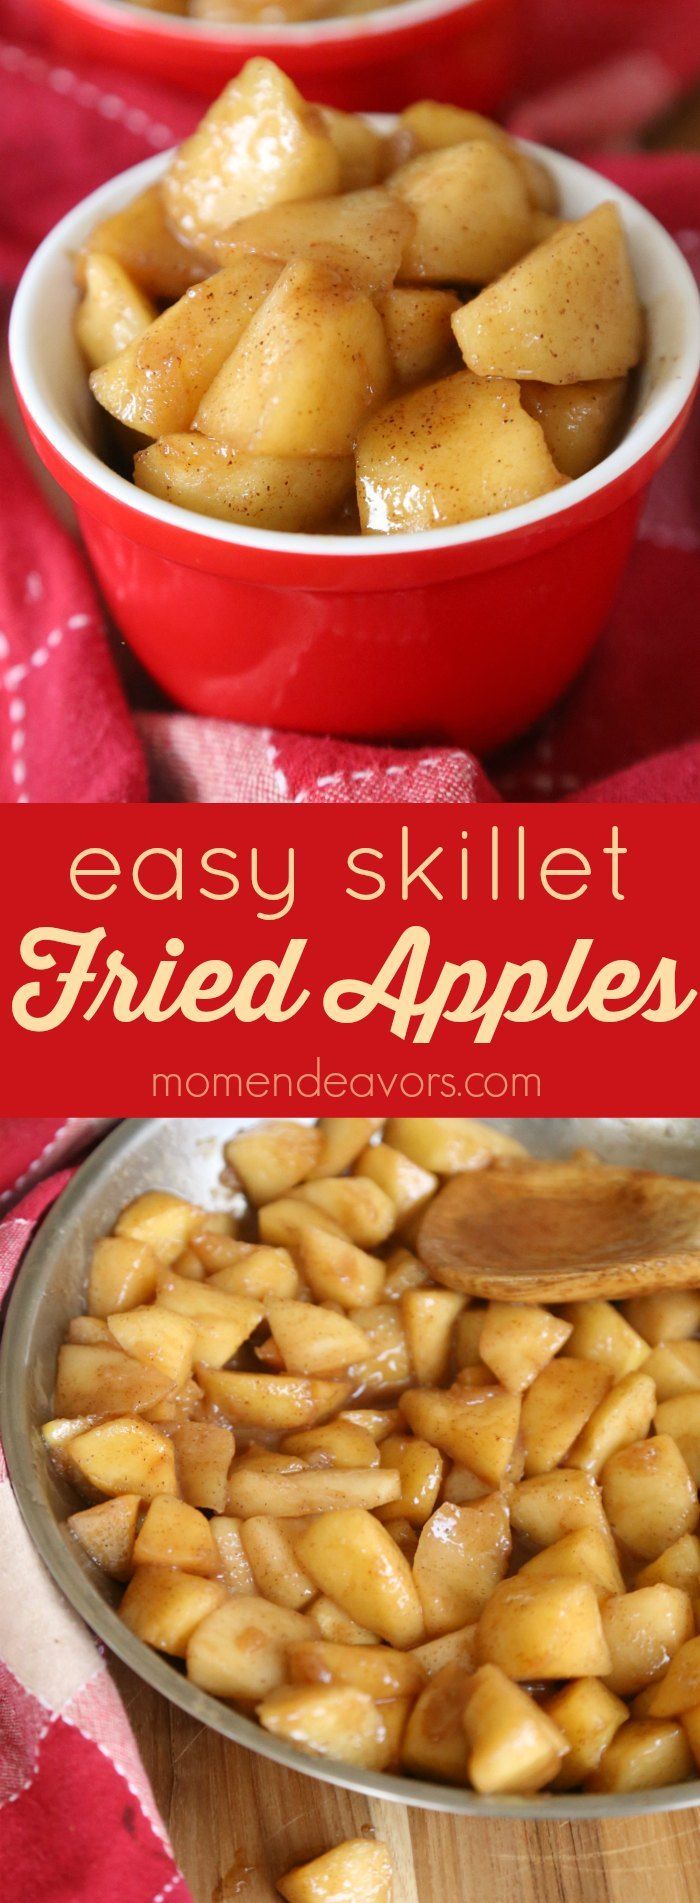 Easy Skillet Fried Apples -fried apples make for a tasty dessert or sweet side dish that the whole family will love. Sponsored by REVEREWare. -   23 apple recipes vegan
 ideas